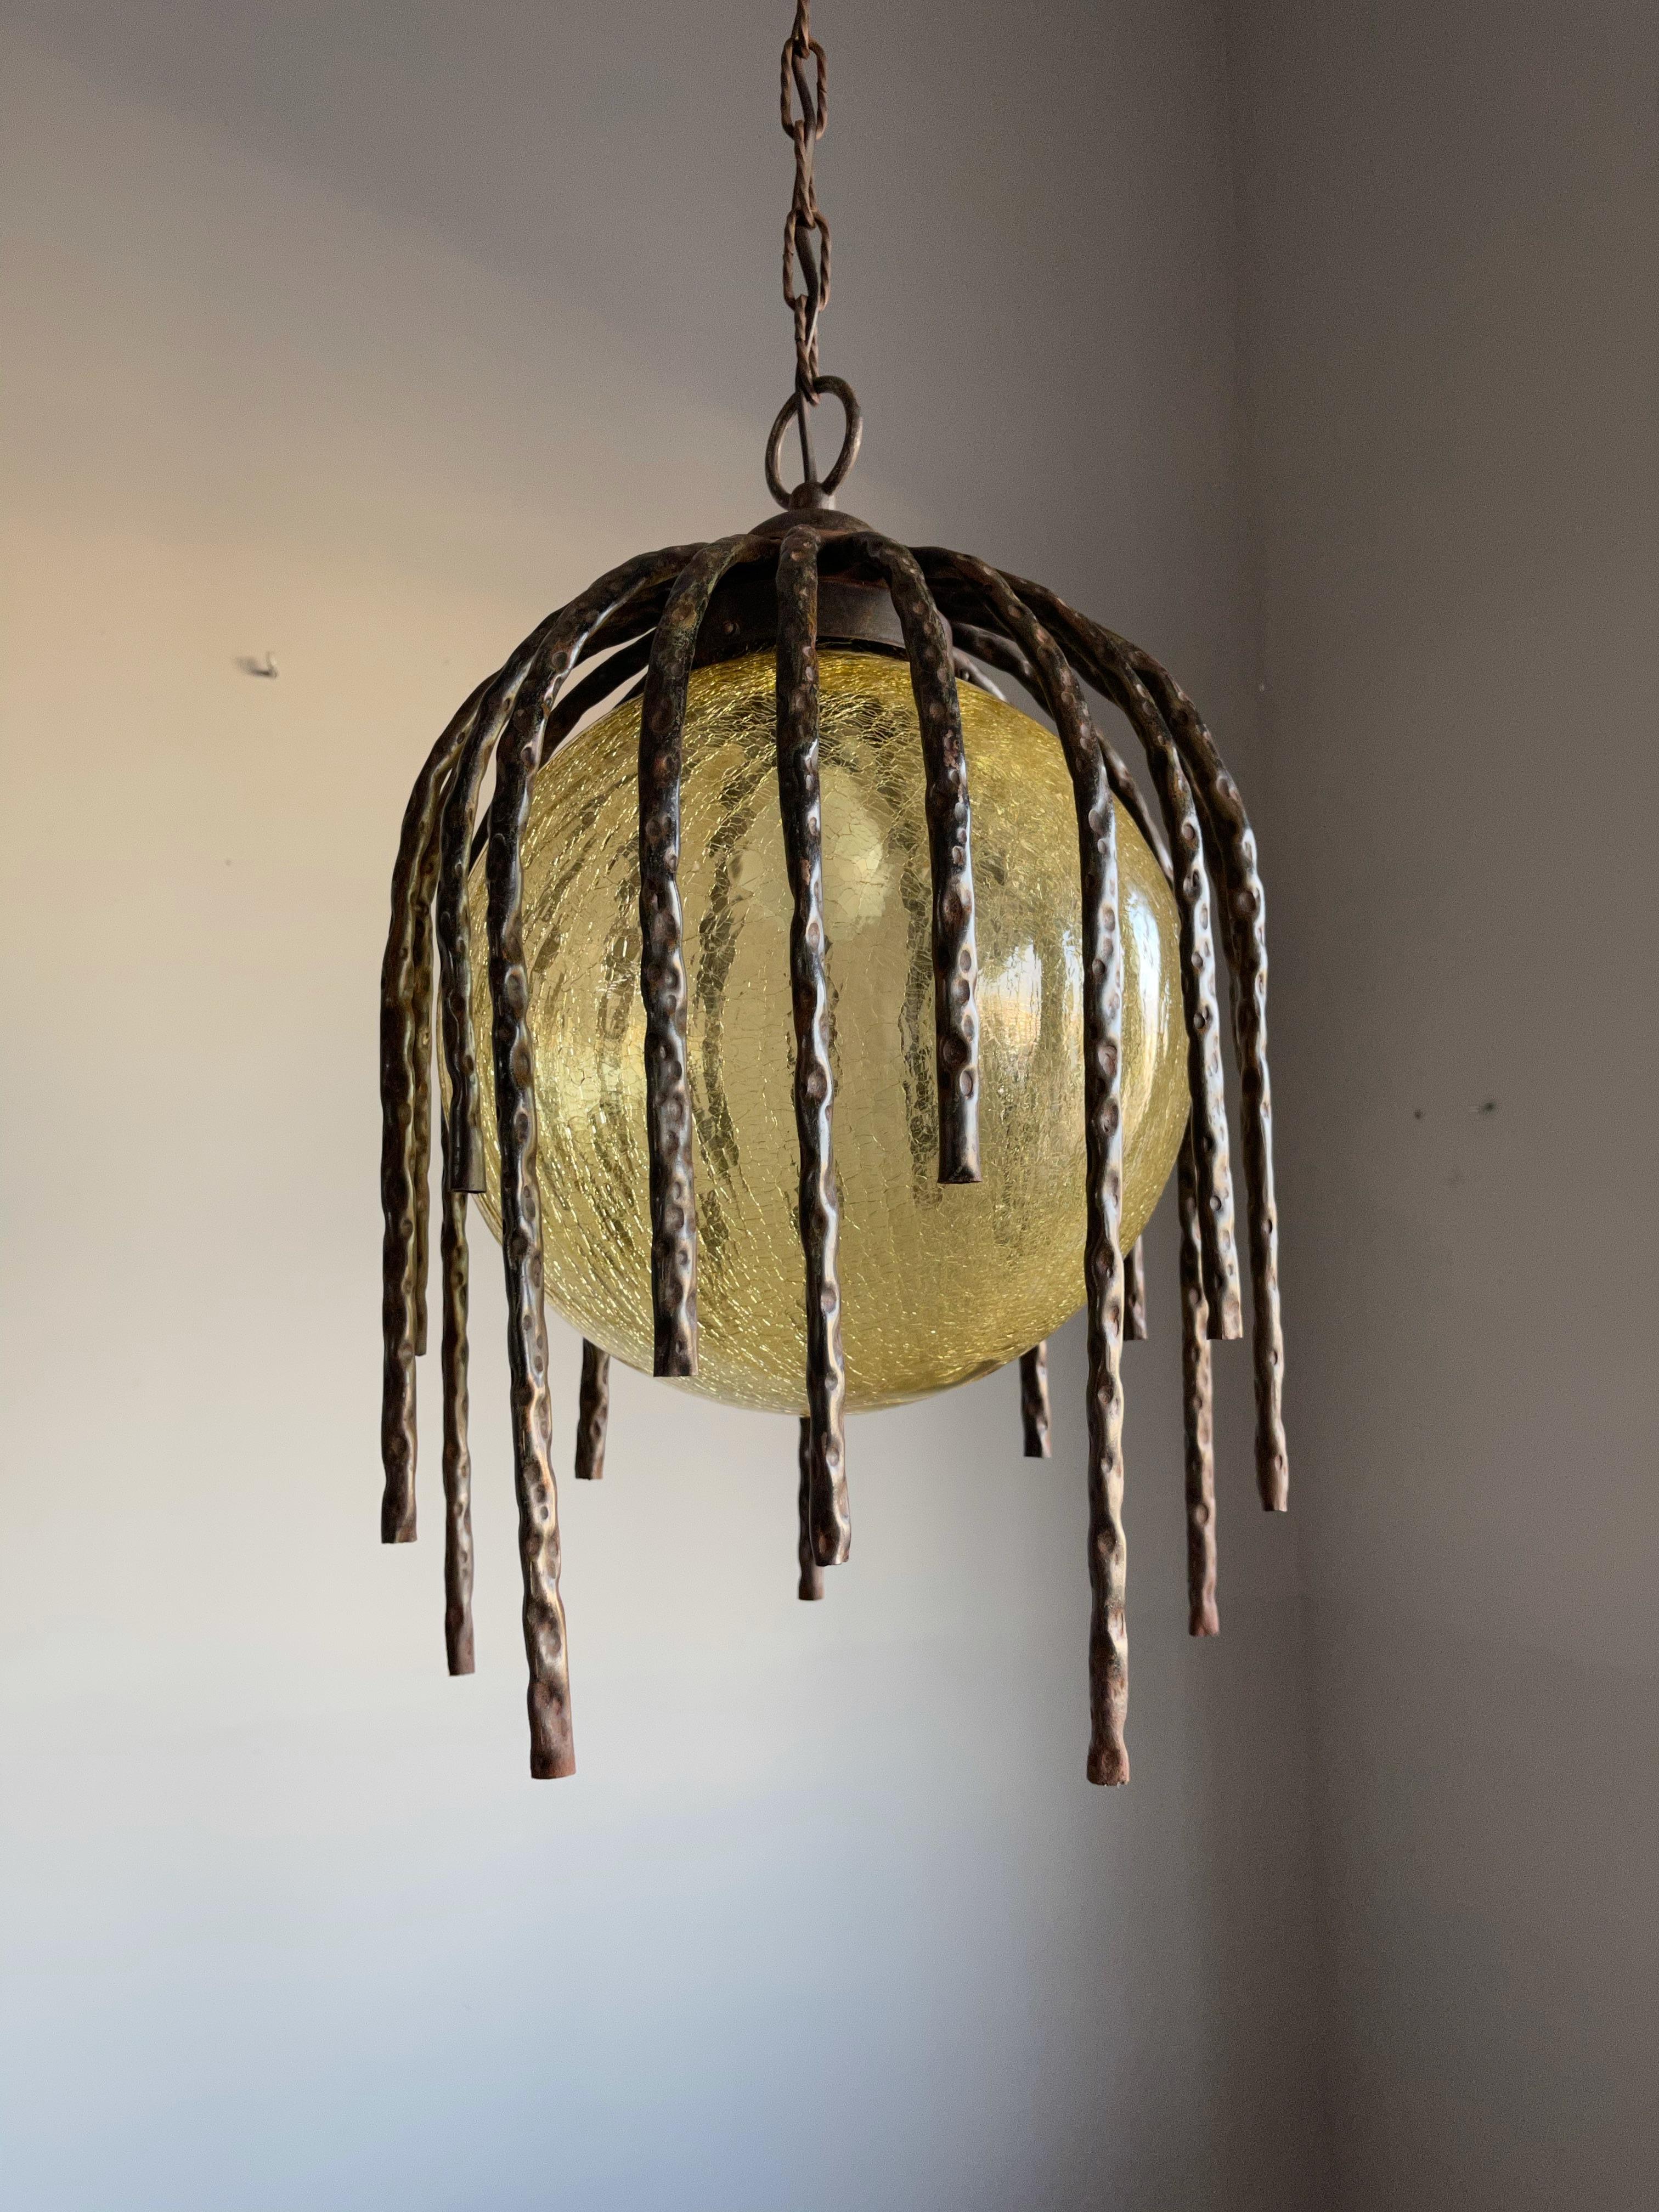 Hand-Crafted Large and Striking, Midcentury Crackled Amber Glass in Iron Frame Pendant Light For Sale